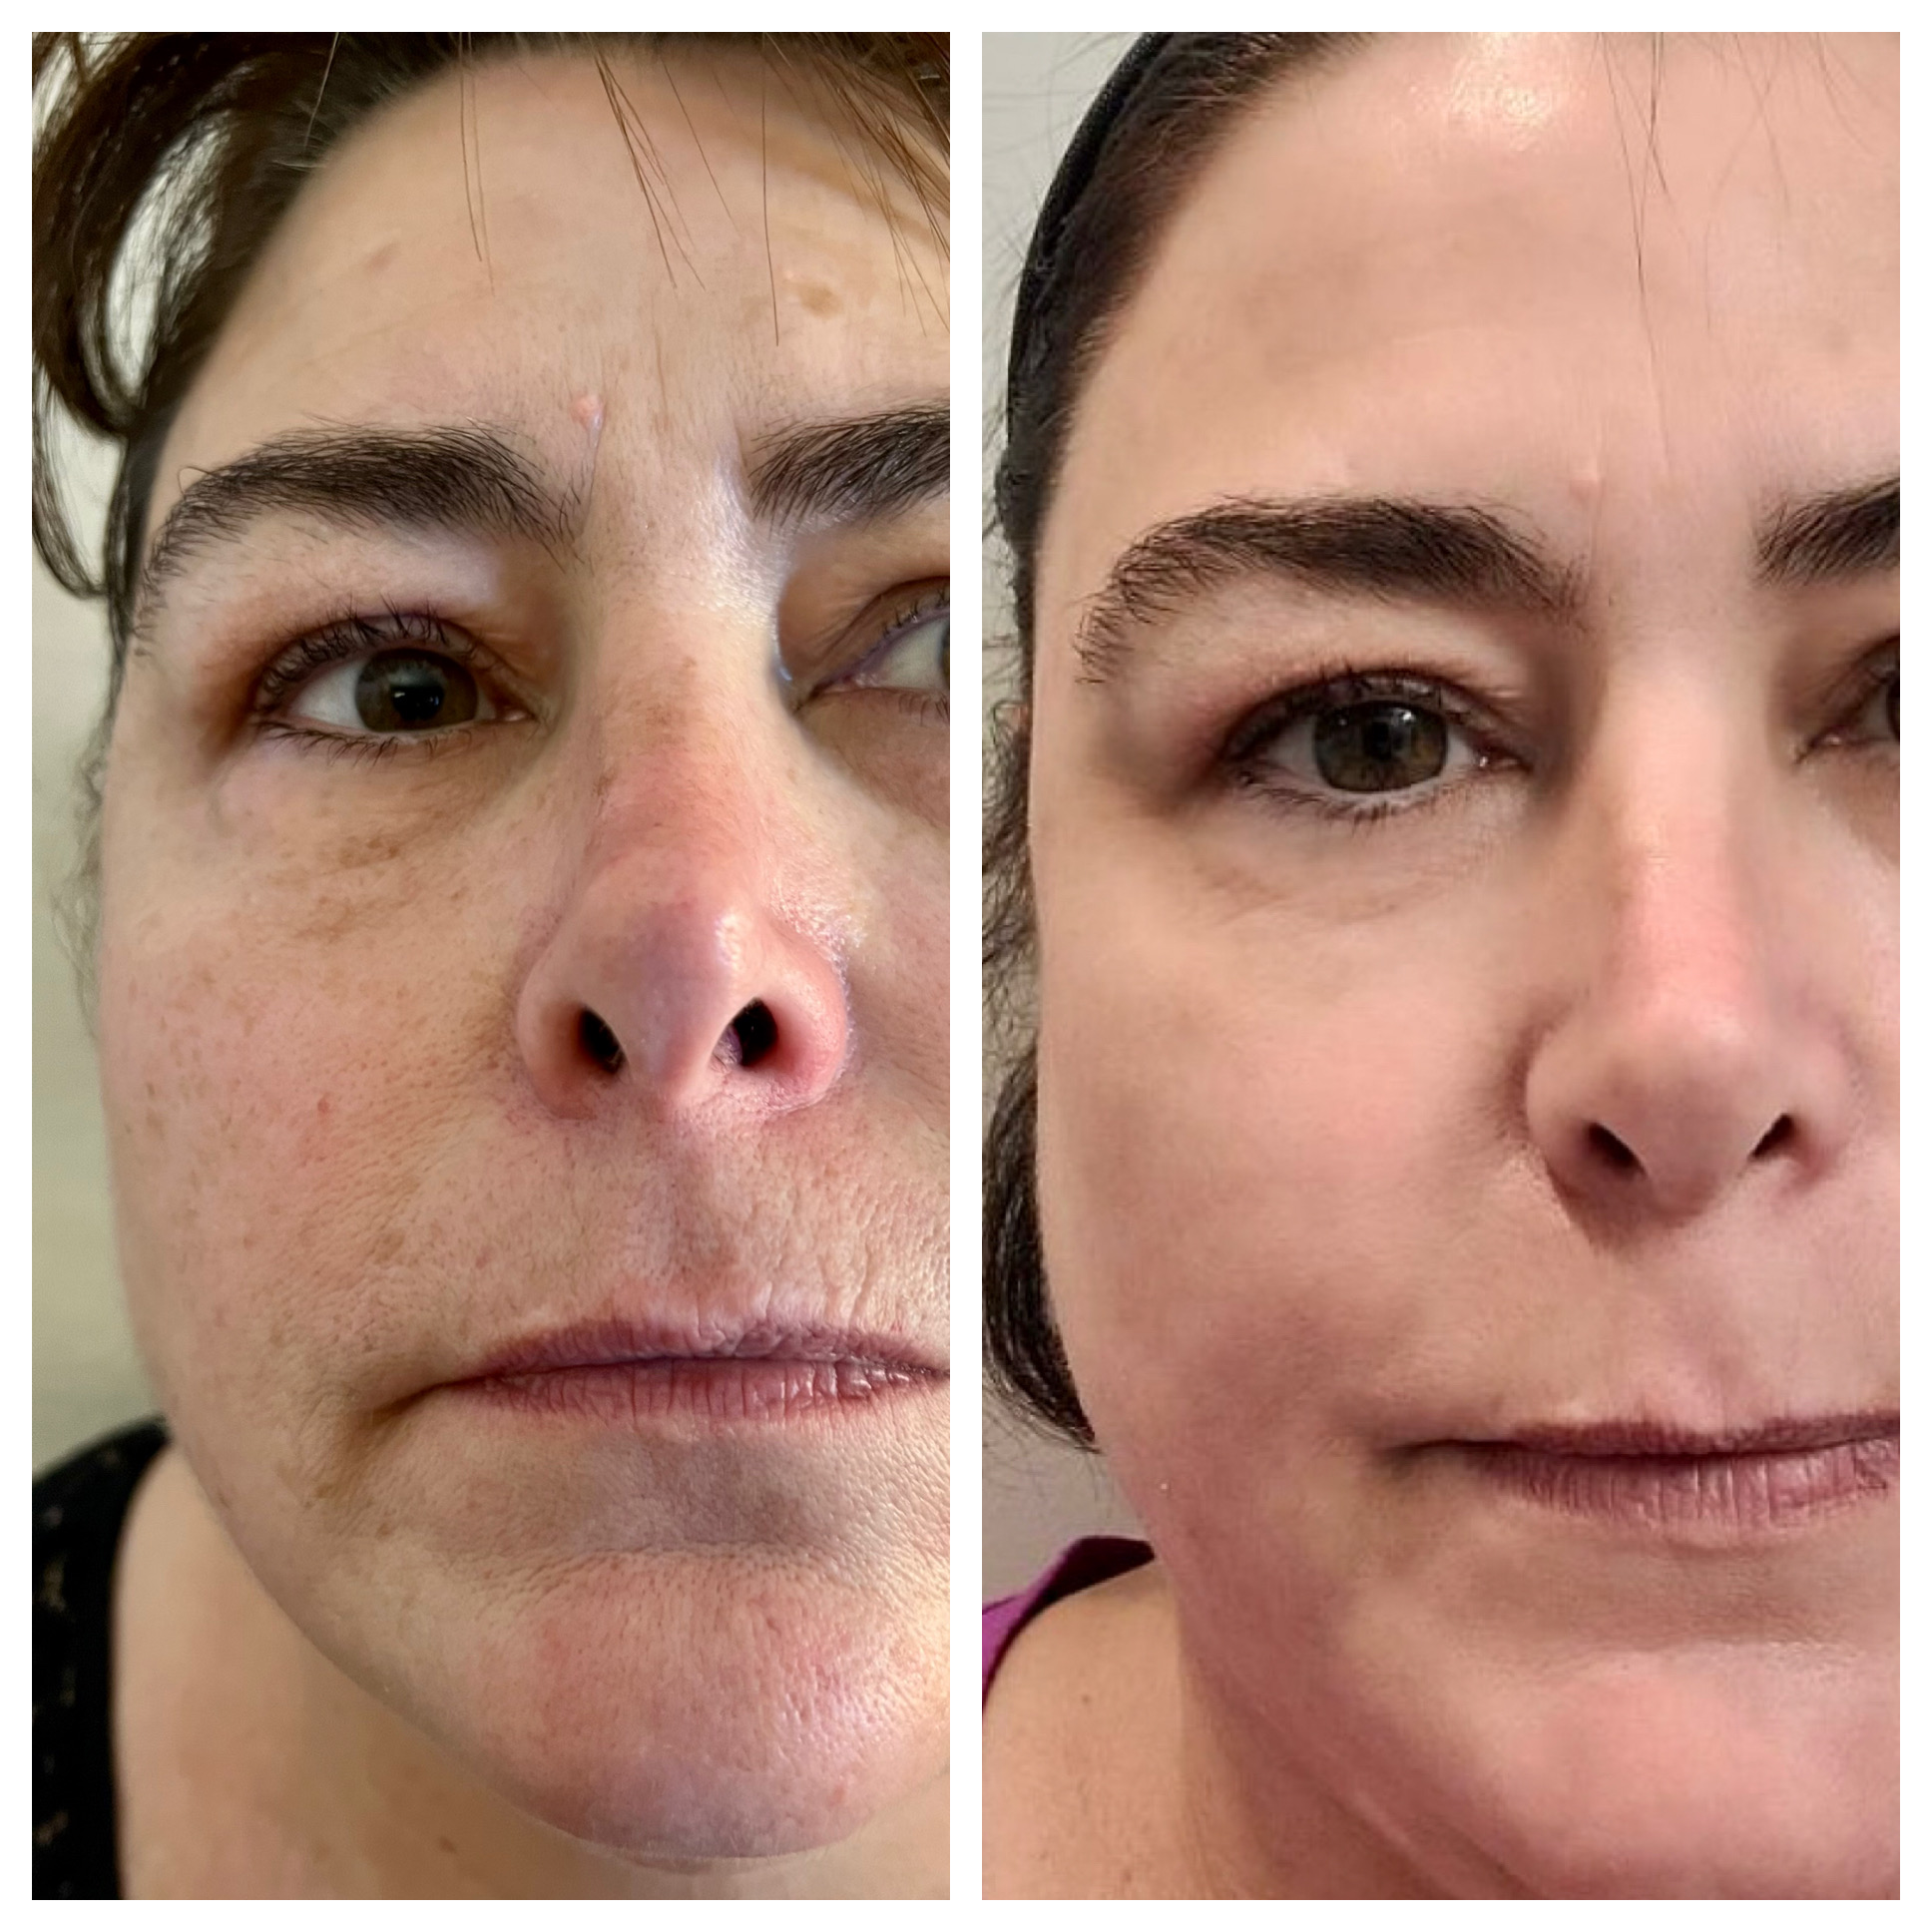 NeoGen Plasma-damagepigment reduction before & after treatment photos in Leominster, MA | Opulent Aesthetics and Wellness